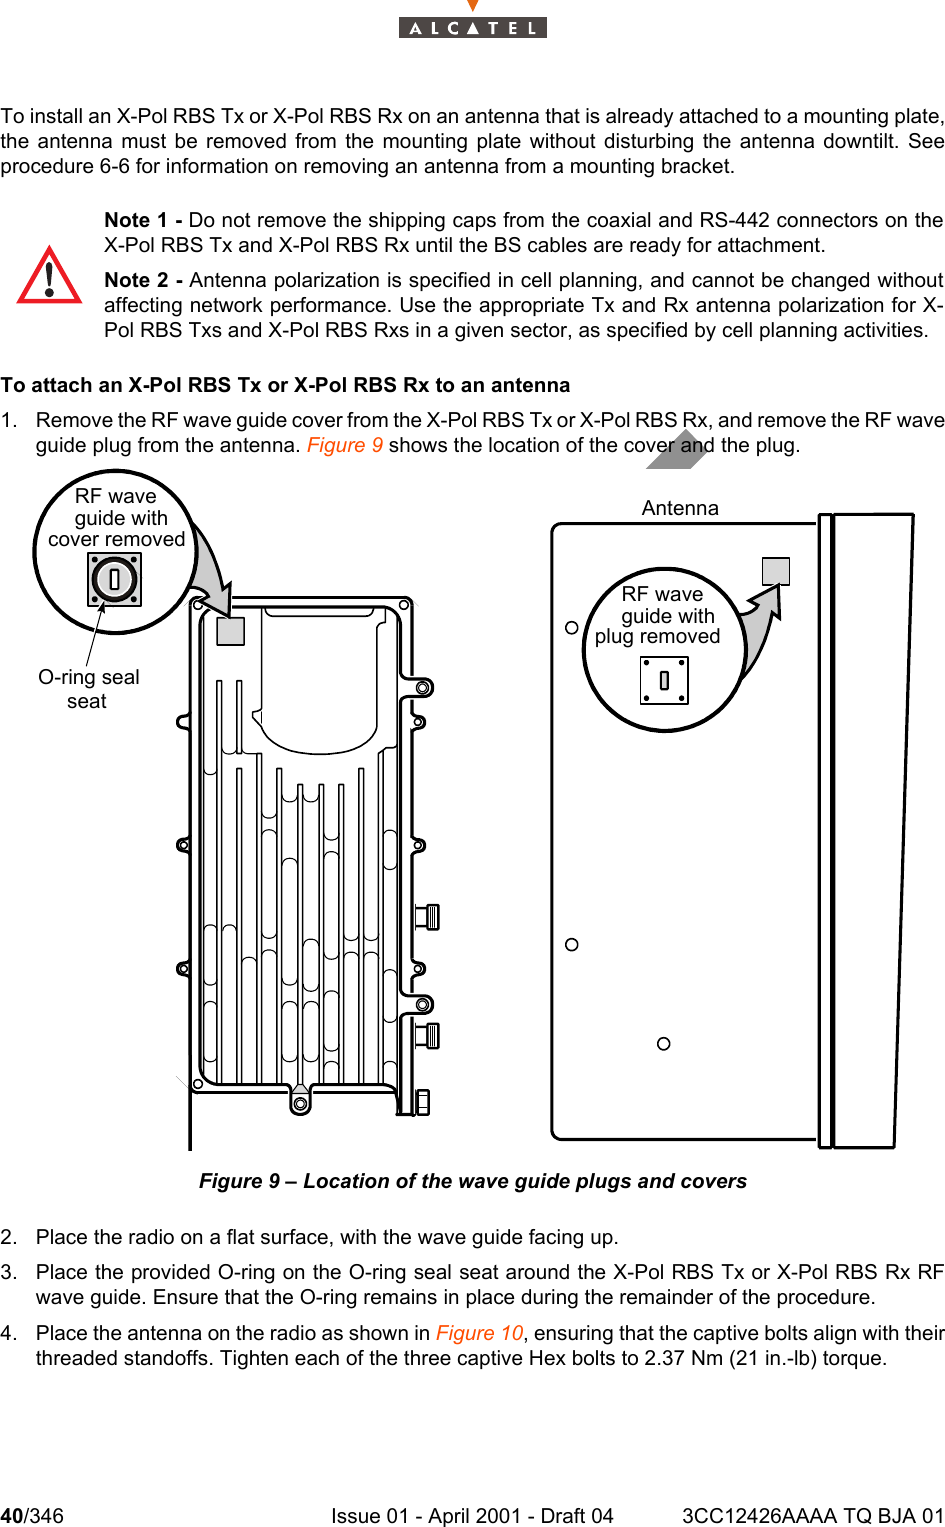 40/346 Issue 01 - April 2001 - Draft 04 3CC12426AAAA TQ BJA 01104To install an X-Pol RBS Tx or X-Pol RBS Rx on an antenna that is already attached to a mounting plate,the antenna must be removed from the mounting plate without disturbing the antenna downtilt. Seeprocedure 6-6 for information on removing an antenna from a mounting bracket.To attach an X-Pol RBS Tx or X-Pol RBS Rx to an antenna1. Remove the RF wave guide cover from the X-Pol RBS Tx or X-Pol RBS Rx, and remove the RF waveguide plug from the antenna. Figure 9 shows the location of the cover and the plug.Figure 9 – Location of the wave guide plugs and covers2. Place the radio on a flat surface, with the wave guide facing up.3. Place the provided O-ring on the O-ring seal seat around the X-Pol RBS Tx or X-Pol RBS Rx RFwave guide. Ensure that the O-ring remains in place during the remainder of the procedure.4. Place the antenna on the radio as shown in Figure 10, ensuring that the captive bolts align with theirthreaded standoffs. Tighten each of the three captive Hex bolts to 2.37 Nm (21 in.-lb) torque.Note 1 - Do not remove the shipping caps from the coaxial and RS-442 connectors on theX-Pol RBS Tx and X-Pol RBS Rx until the BS cables are ready for attachment.Note 2 - Antenna polarization is specified in cell planning, and cannot be changed withoutaffecting network performance. Use the appropriate Tx and Rx antenna polarization for X-Pol RBS Txs and X-Pol RBS Rxs in a given sector, as specified by cell planning activities.RF waveguide with cover removedO-ring sealseatAntennaRF waveguide with plug removed